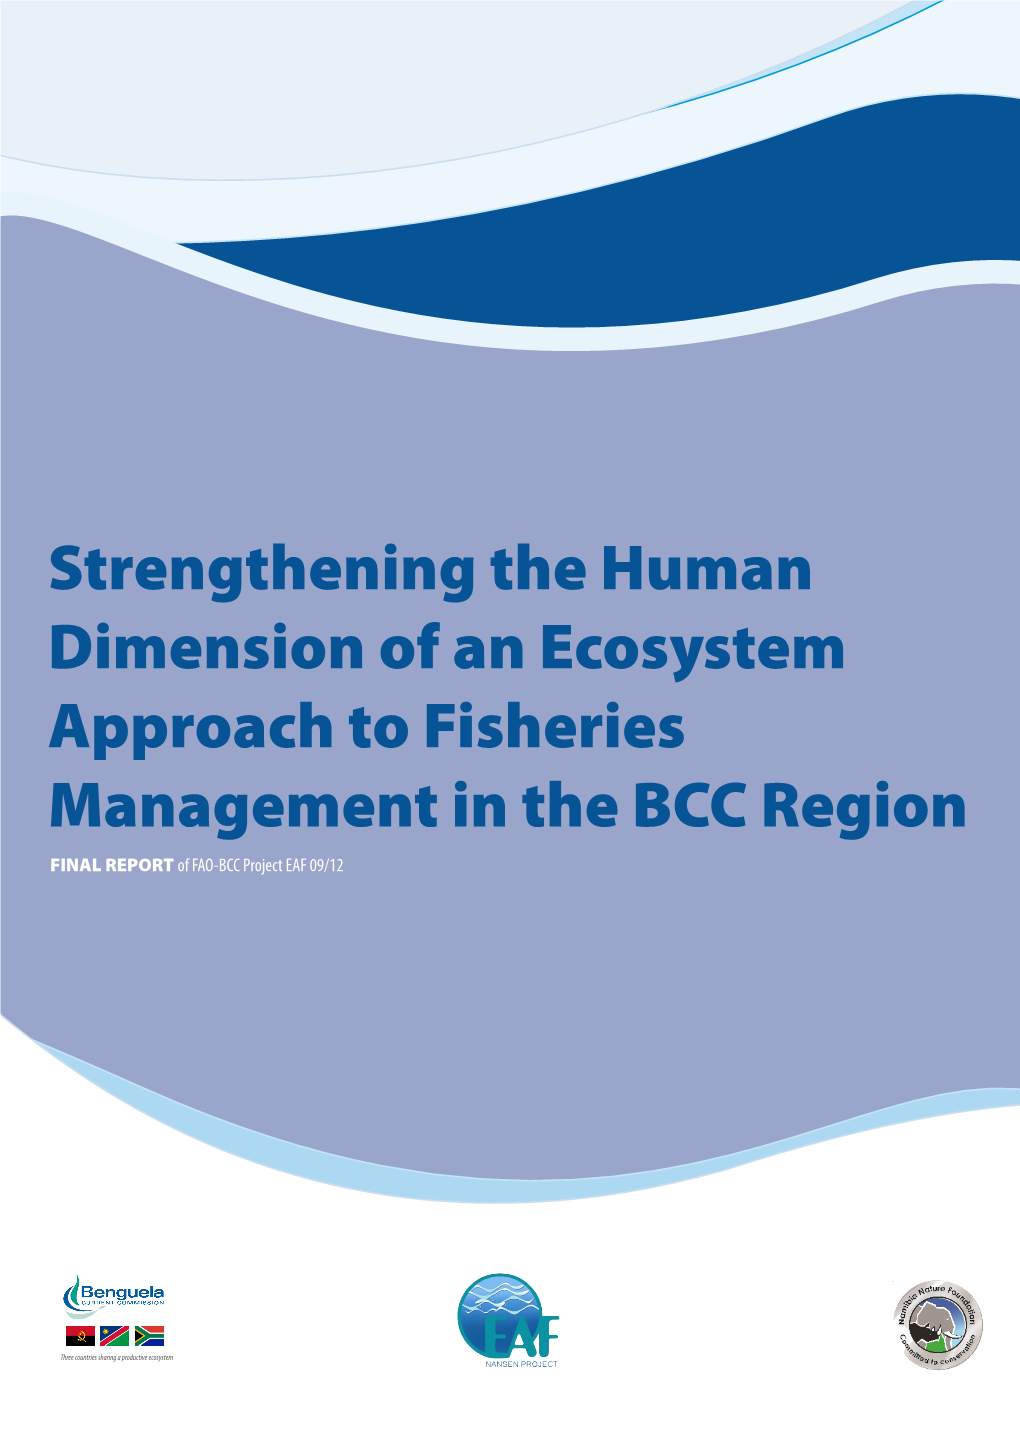 Strengthening the Human Dimension of an Ecosystem Approach to Fisheries Management in the BCC Region FINAL REPORT of FAO-BCC Project EAF 09/12